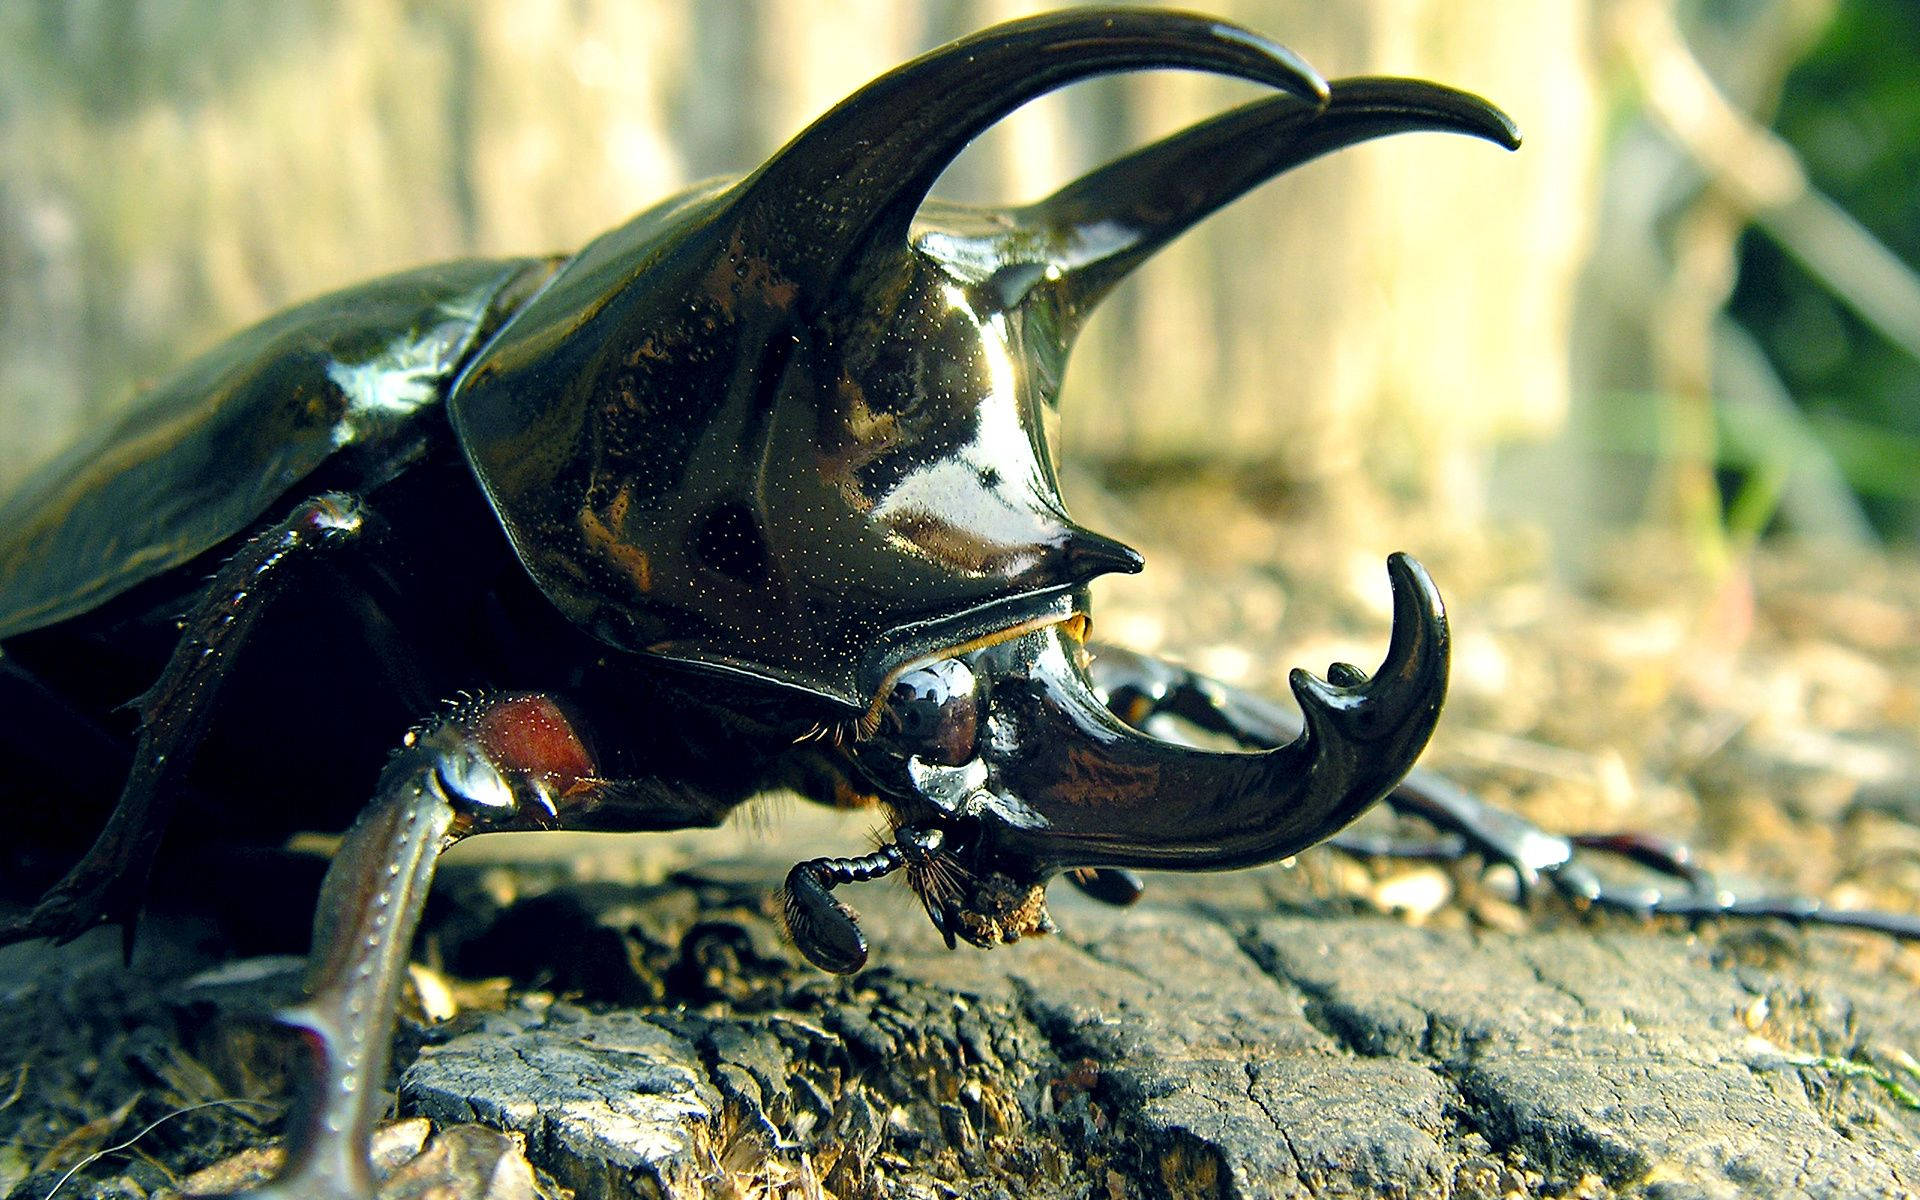 Caption: Intricate Close-Up of a Rhinoceros Beetle Wallpaper